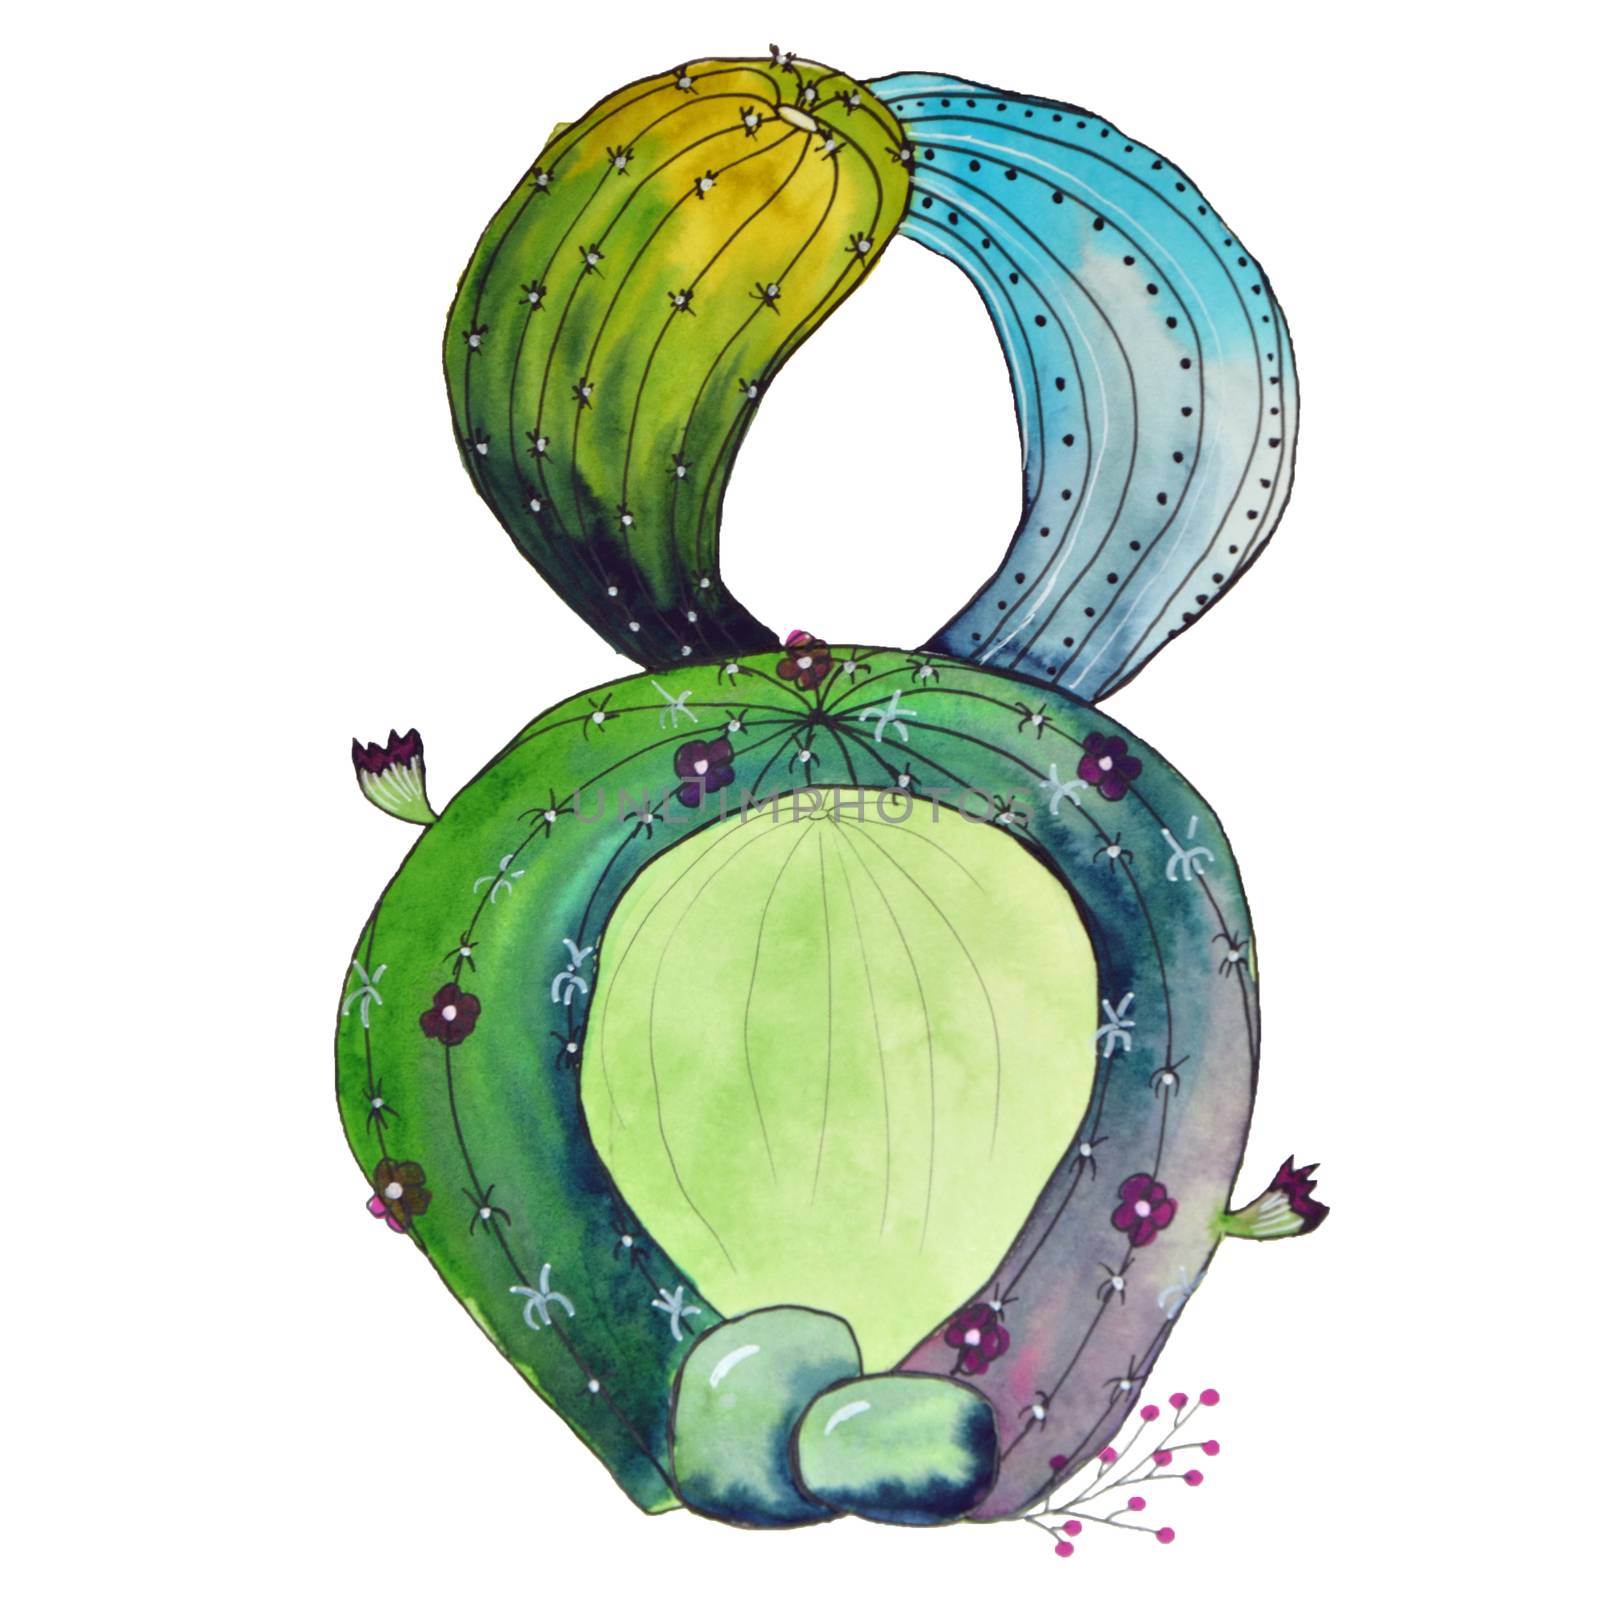 Cactus fantasy watercolor illustration of number eight by kimbo-bo